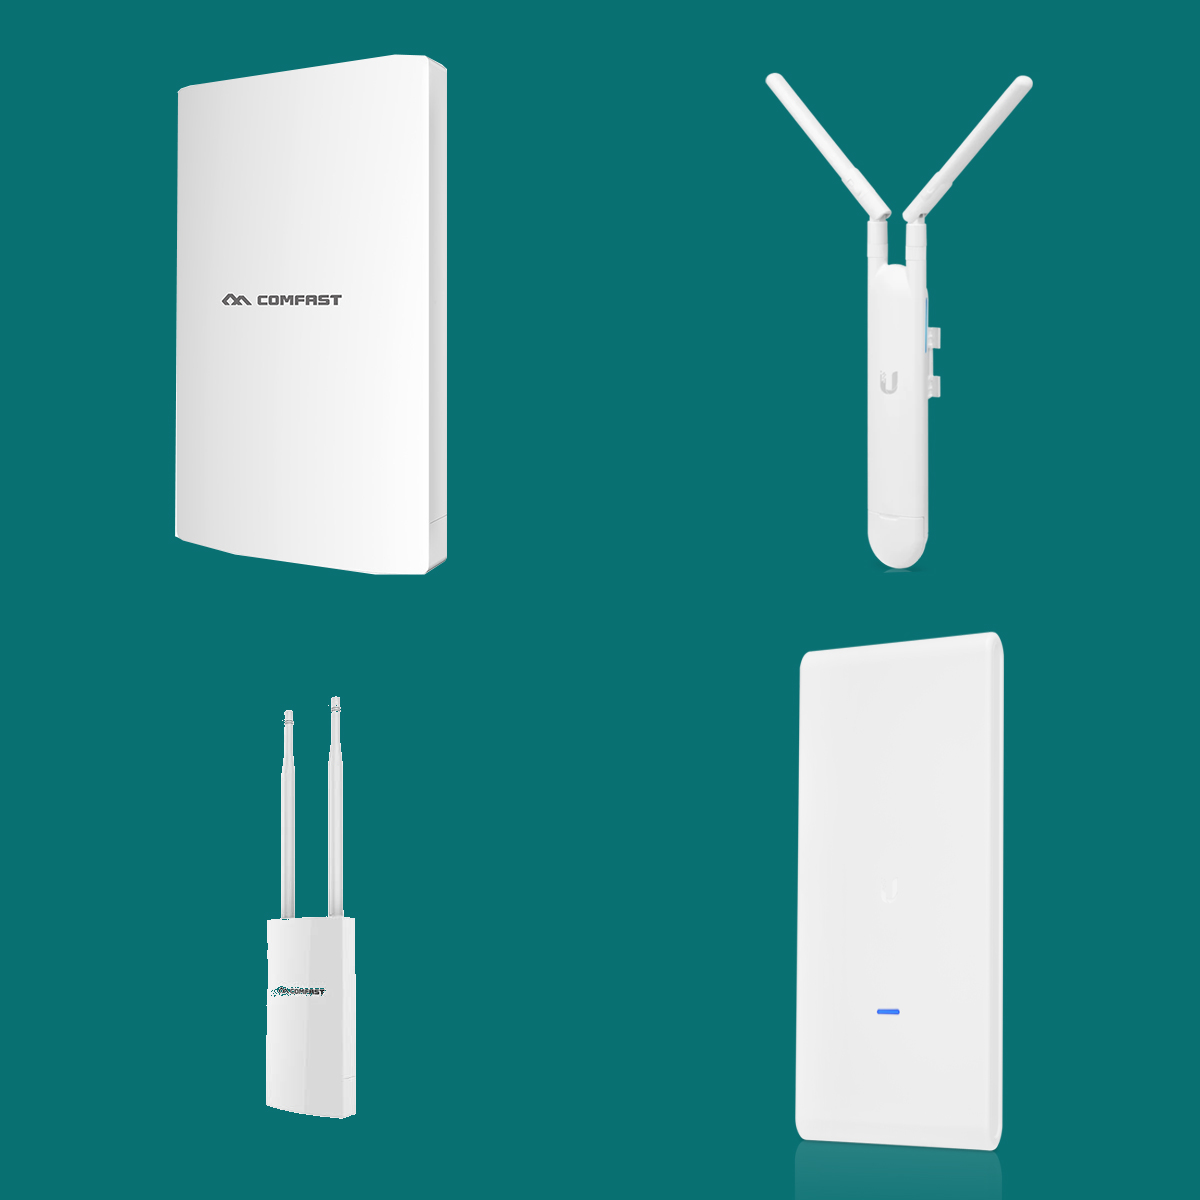 Outdoor WiFi Access Points - How to Deploy Outdoor Networks